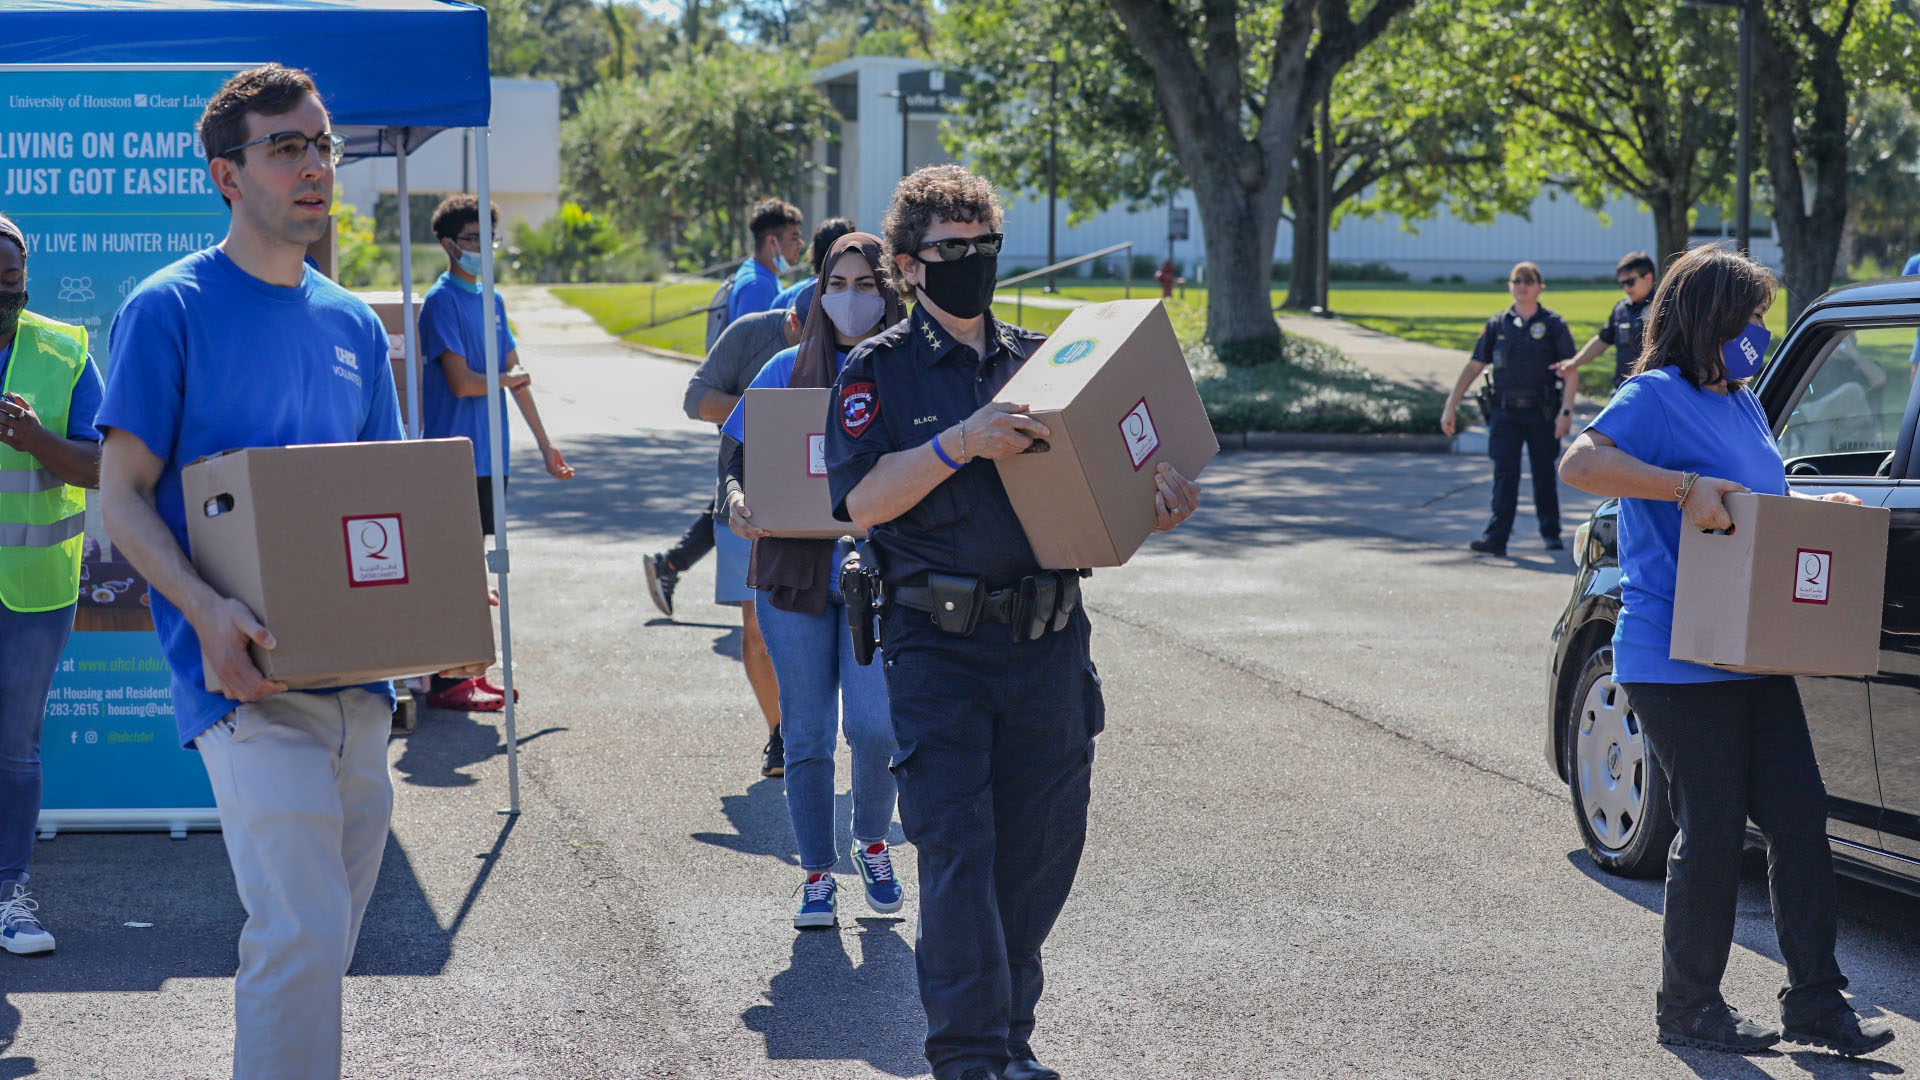 Volunteers in UHCL shirts carry boxes of food to a waiting vehicle